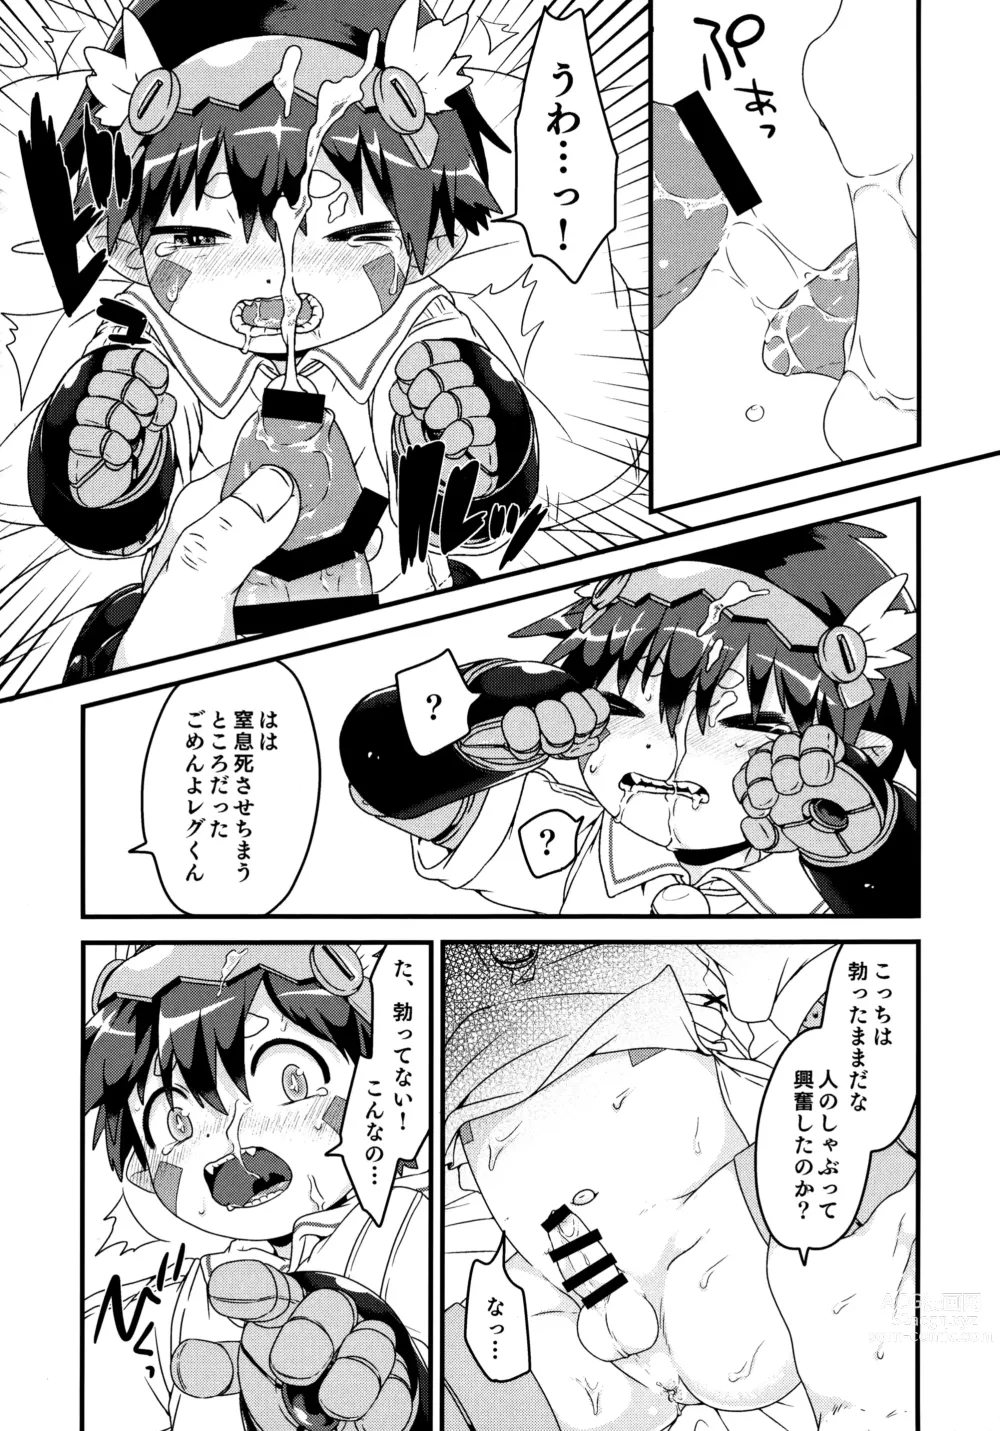 Page 23 of doujinshi Do Aubades Dream of Electric Sheep?